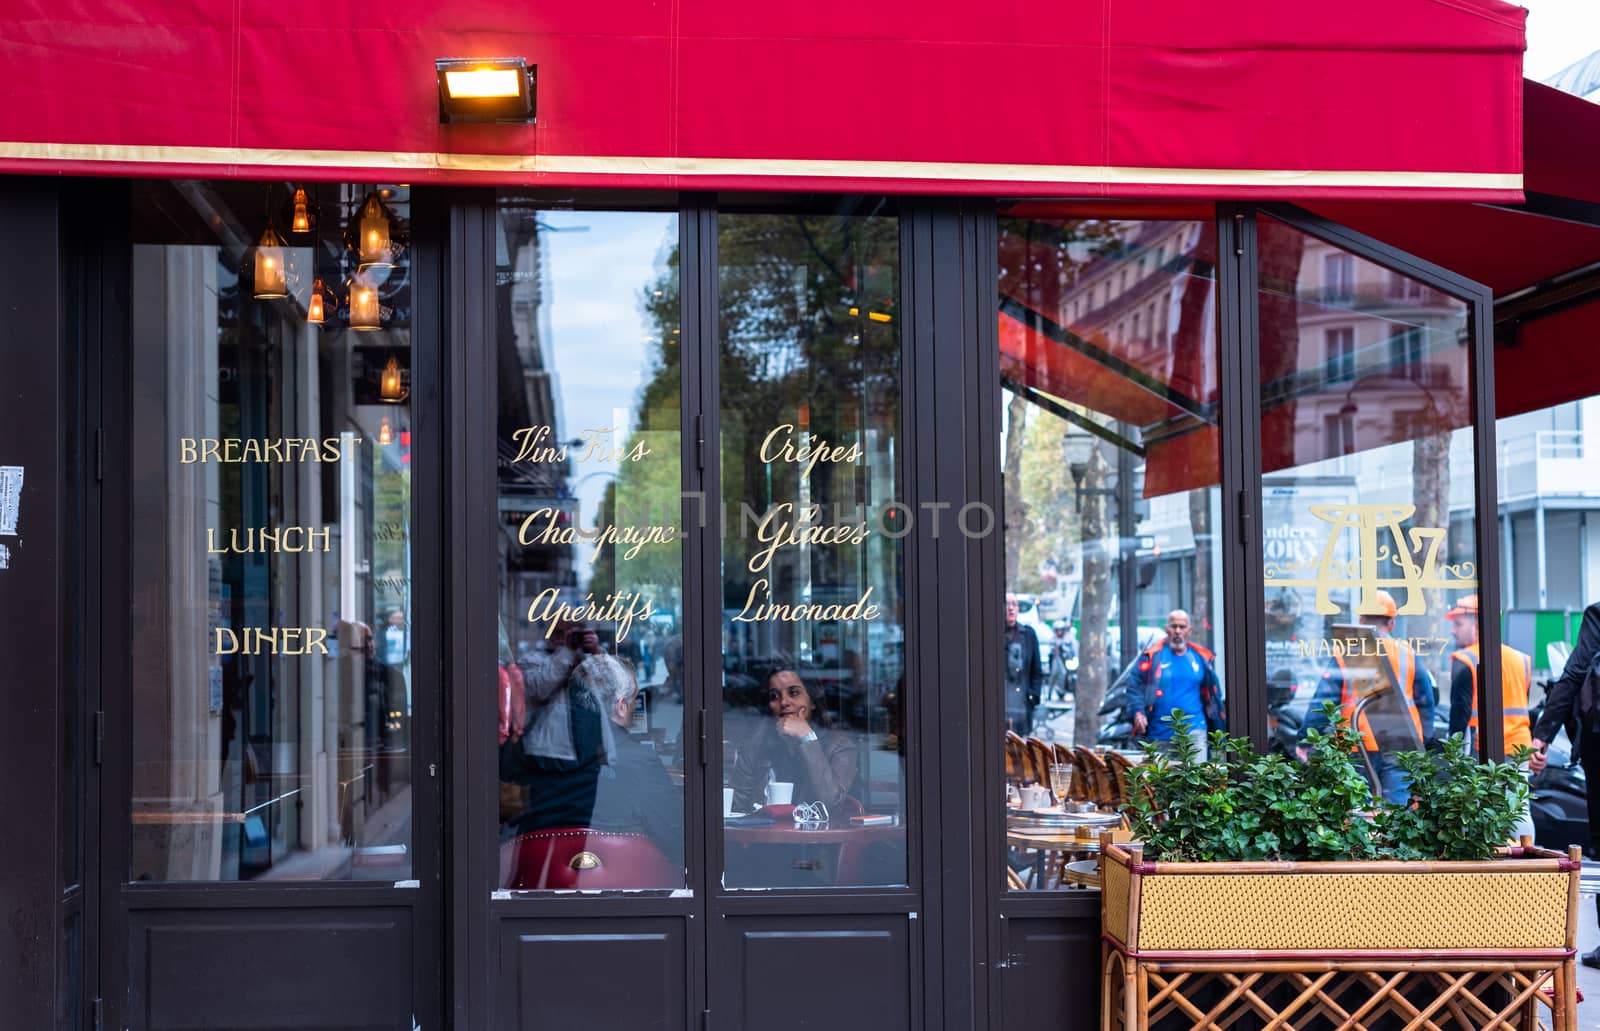 Inside and Outside a Paris Cafe by jfbenning